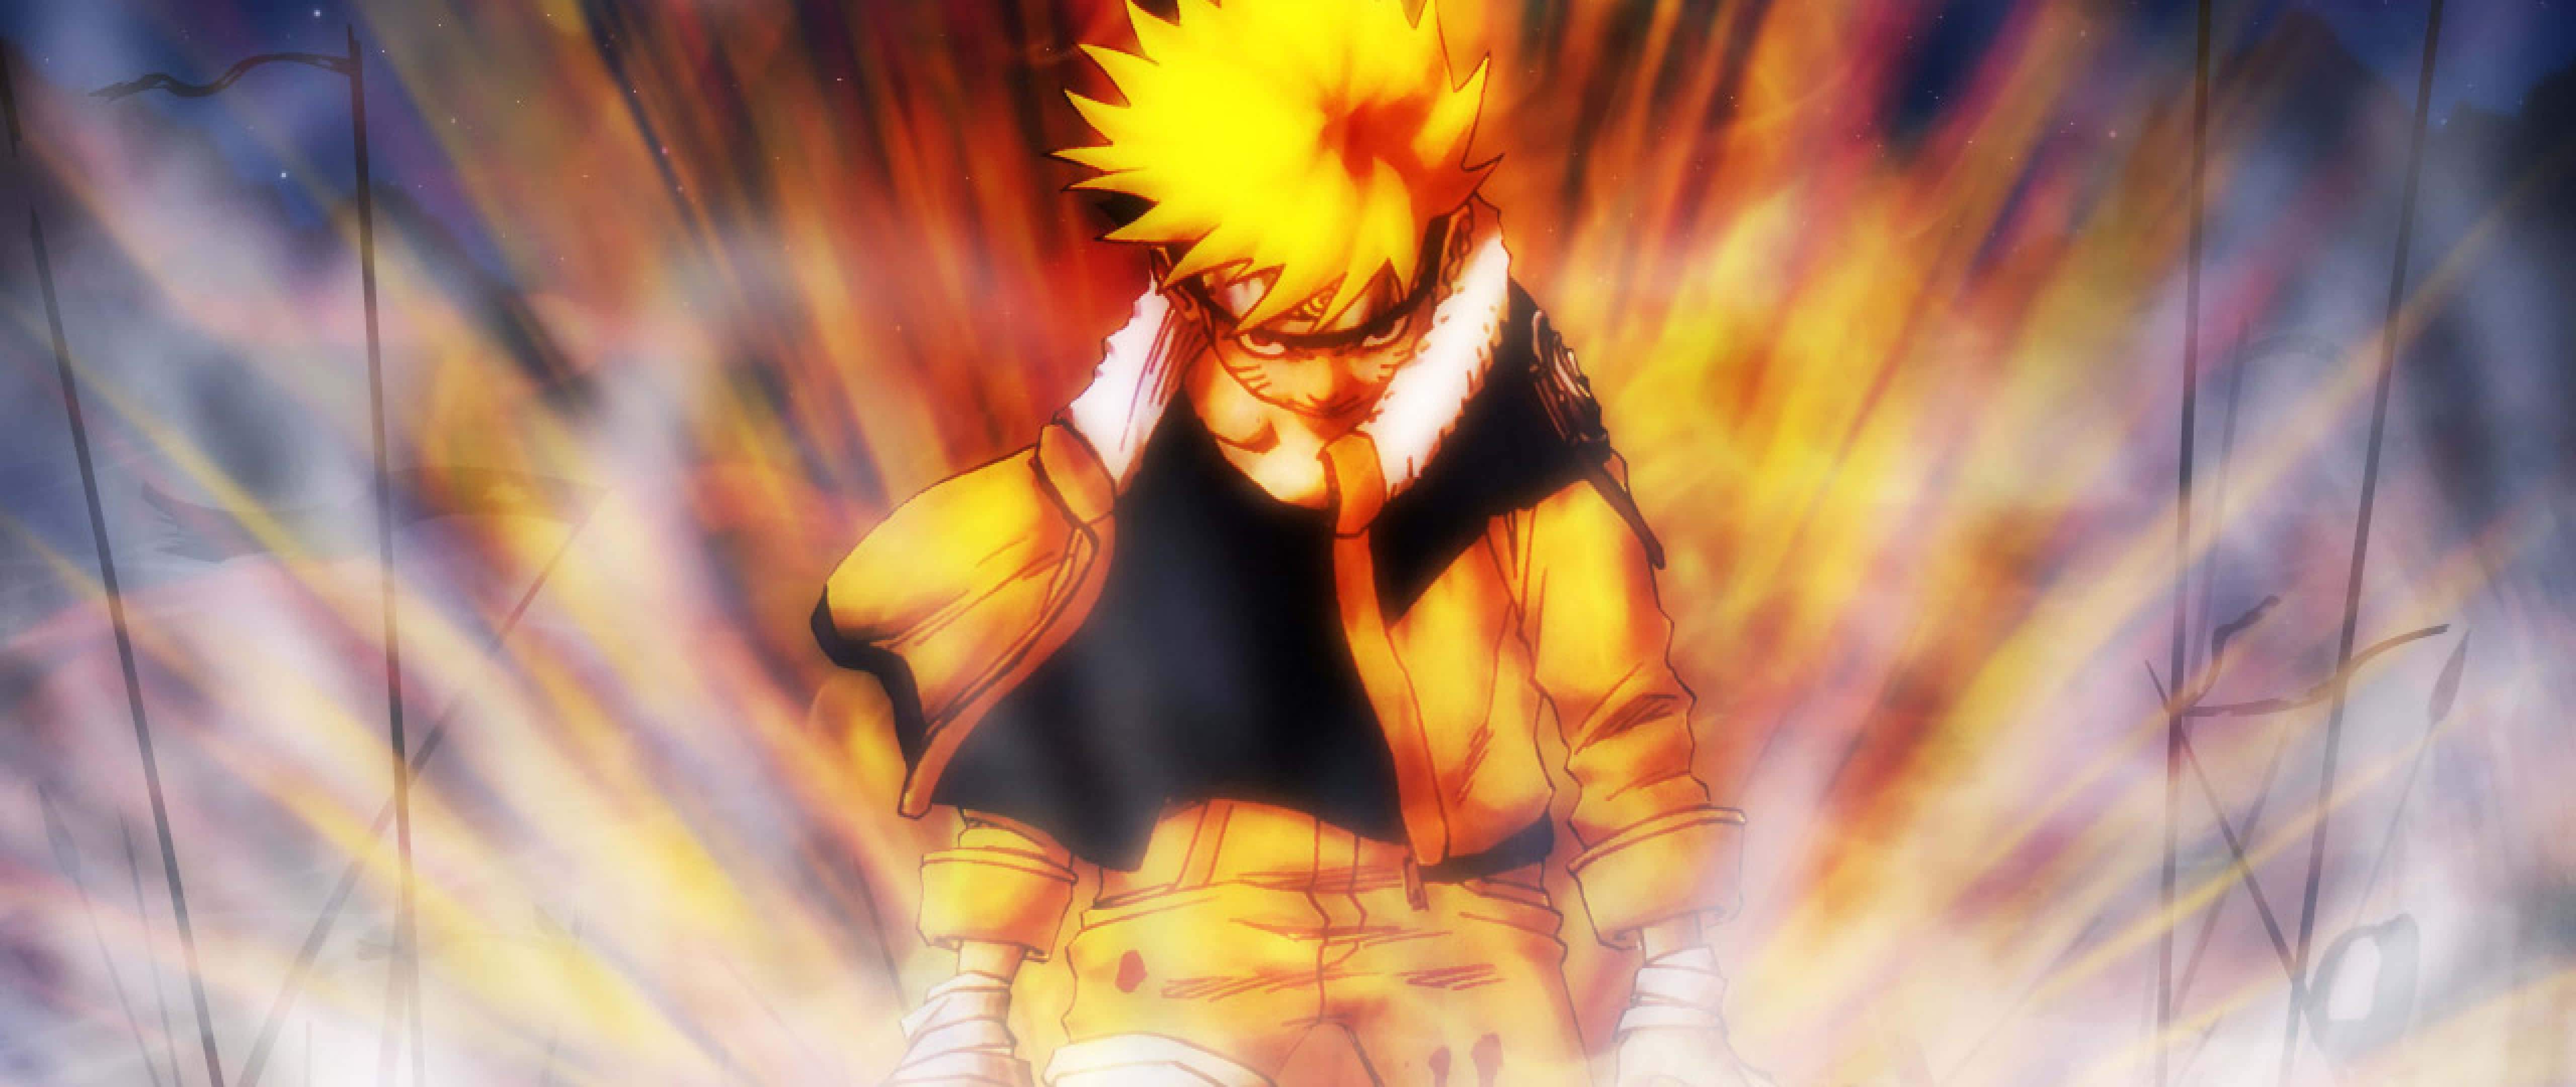 "naruto Uzumaki: Courage In The Face Of Difficulties" Wallpaper